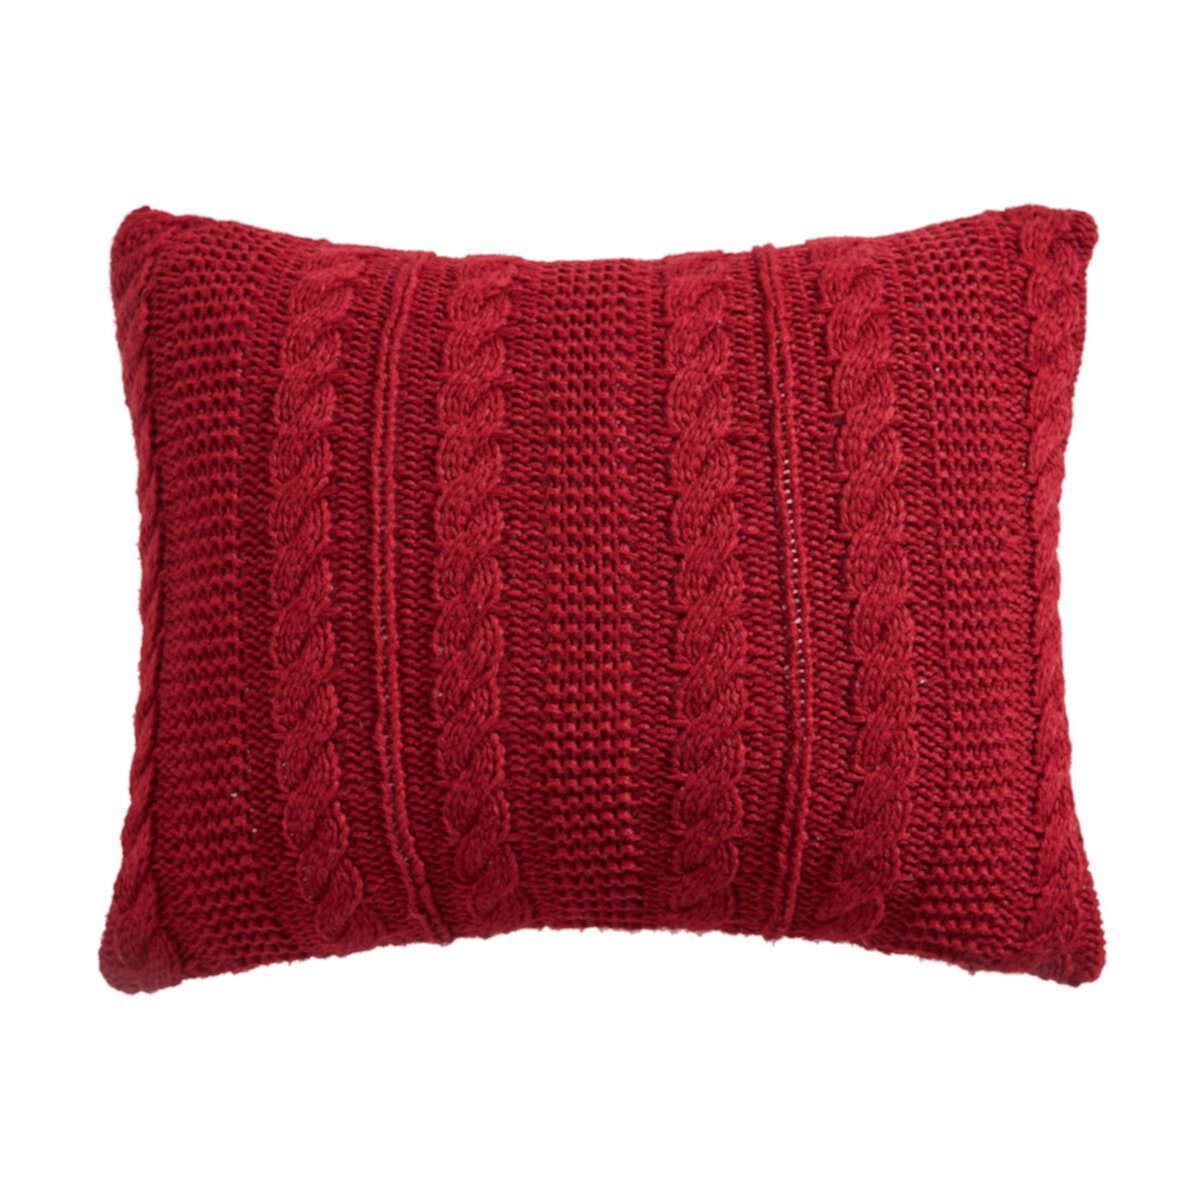 Levtex Home Astrid Red Cable Knit Throw Pillow Levtex